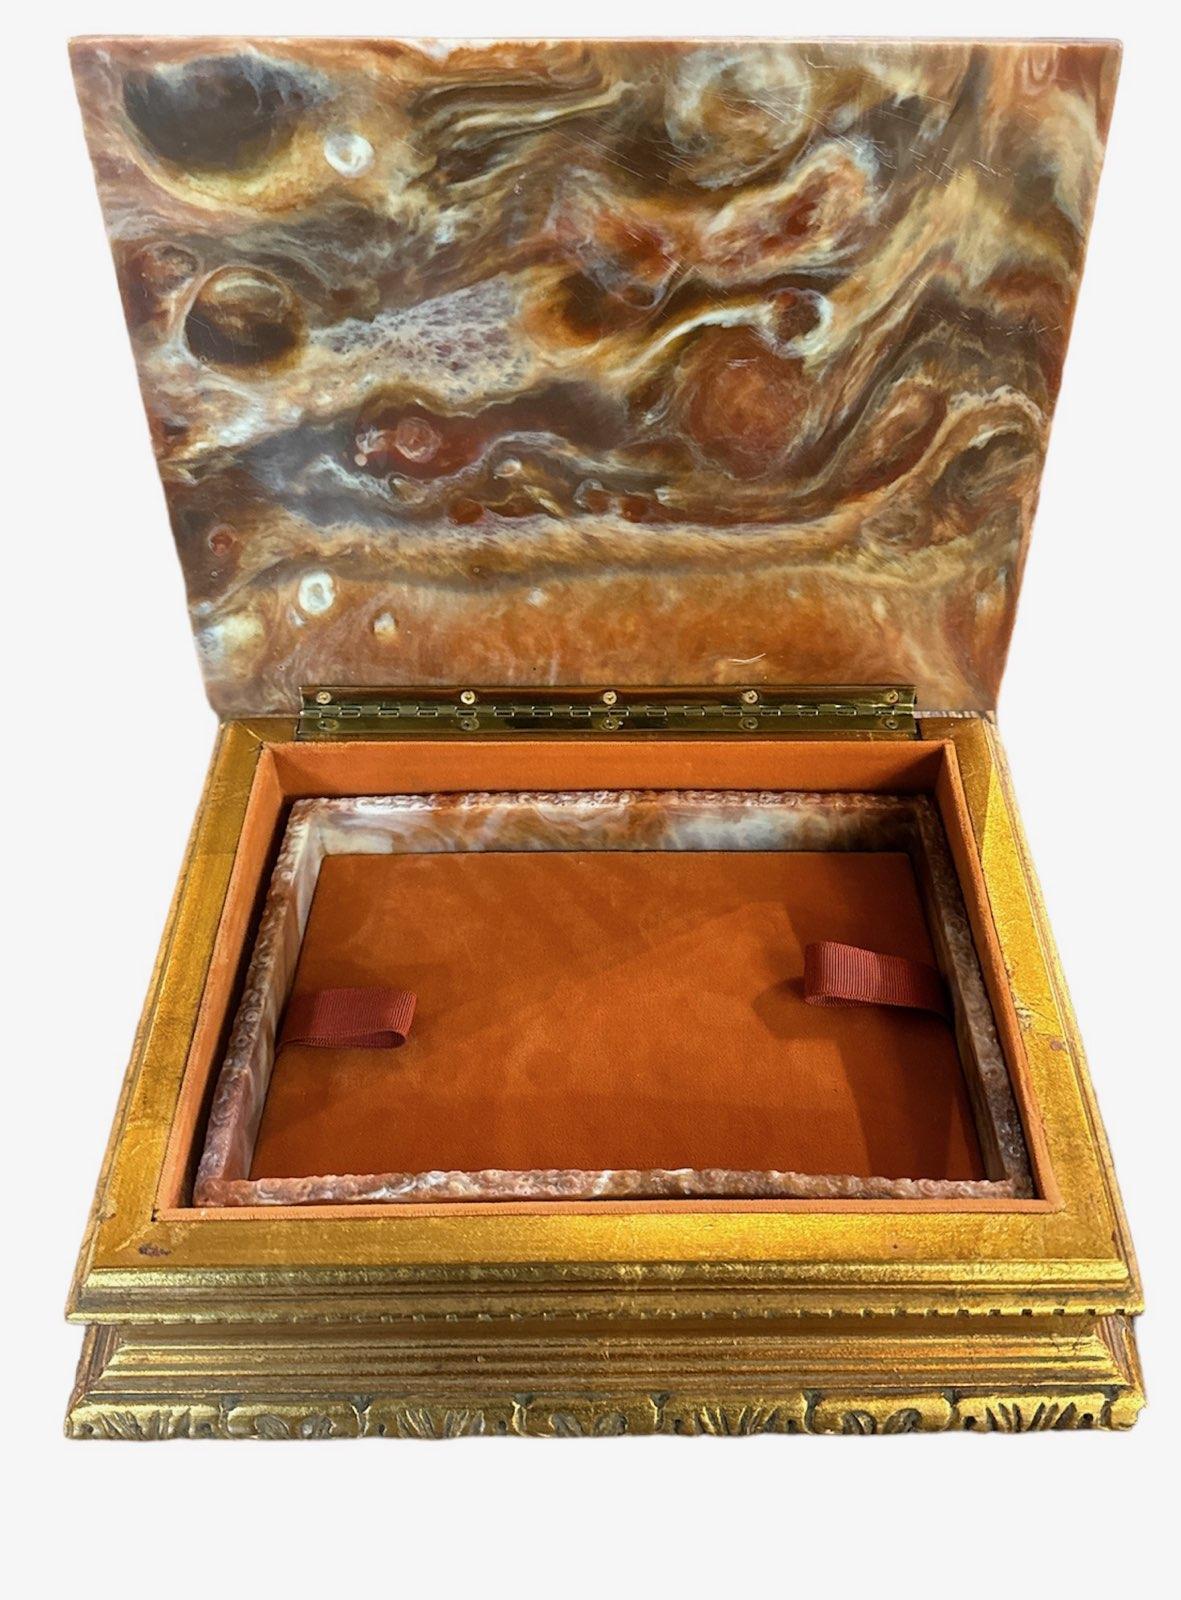 incolay stone jewelry box